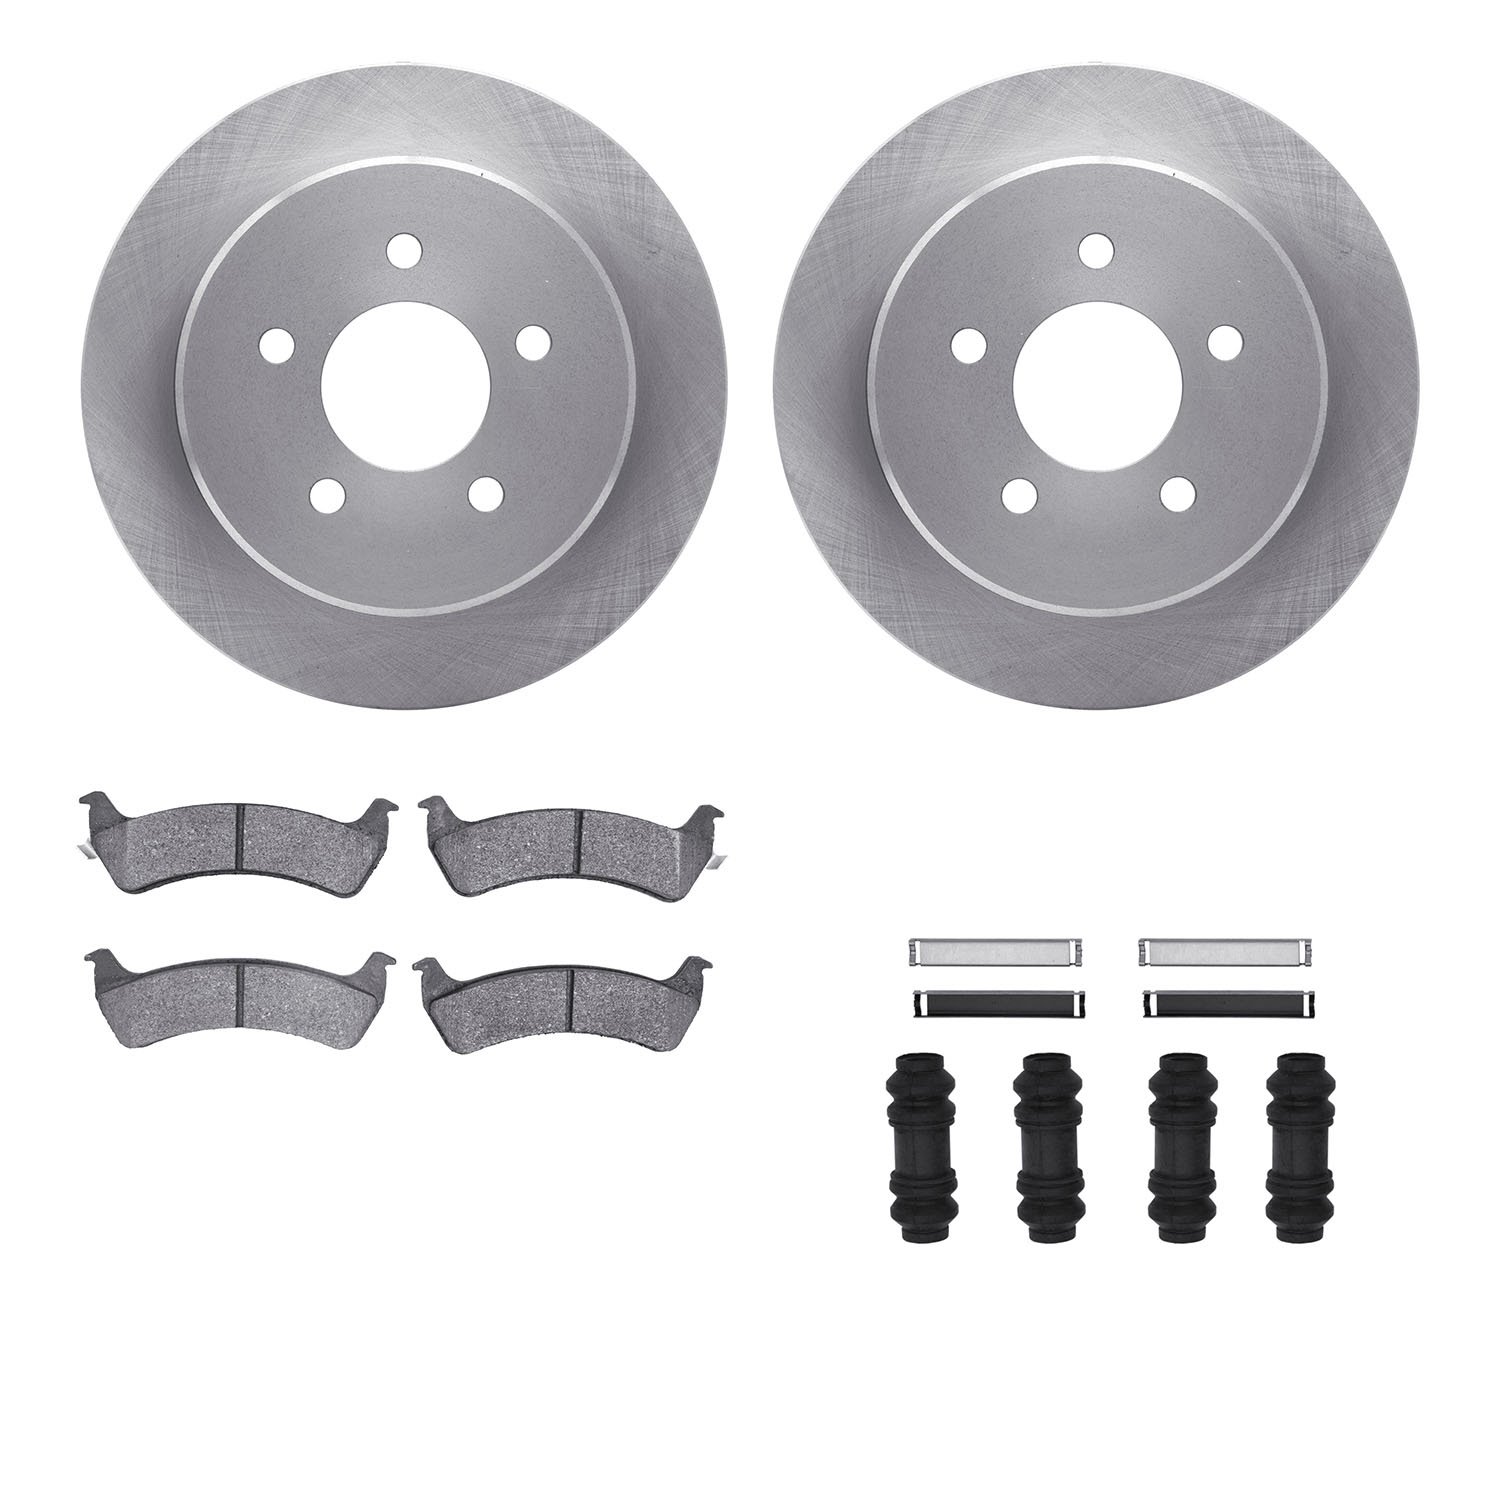 6412-54089 Brake Rotors with Ultimate-Duty Brake Pads Kit & Hardware, 2001-2002 Ford/Lincoln/Mercury/Mazda, Position: Rear